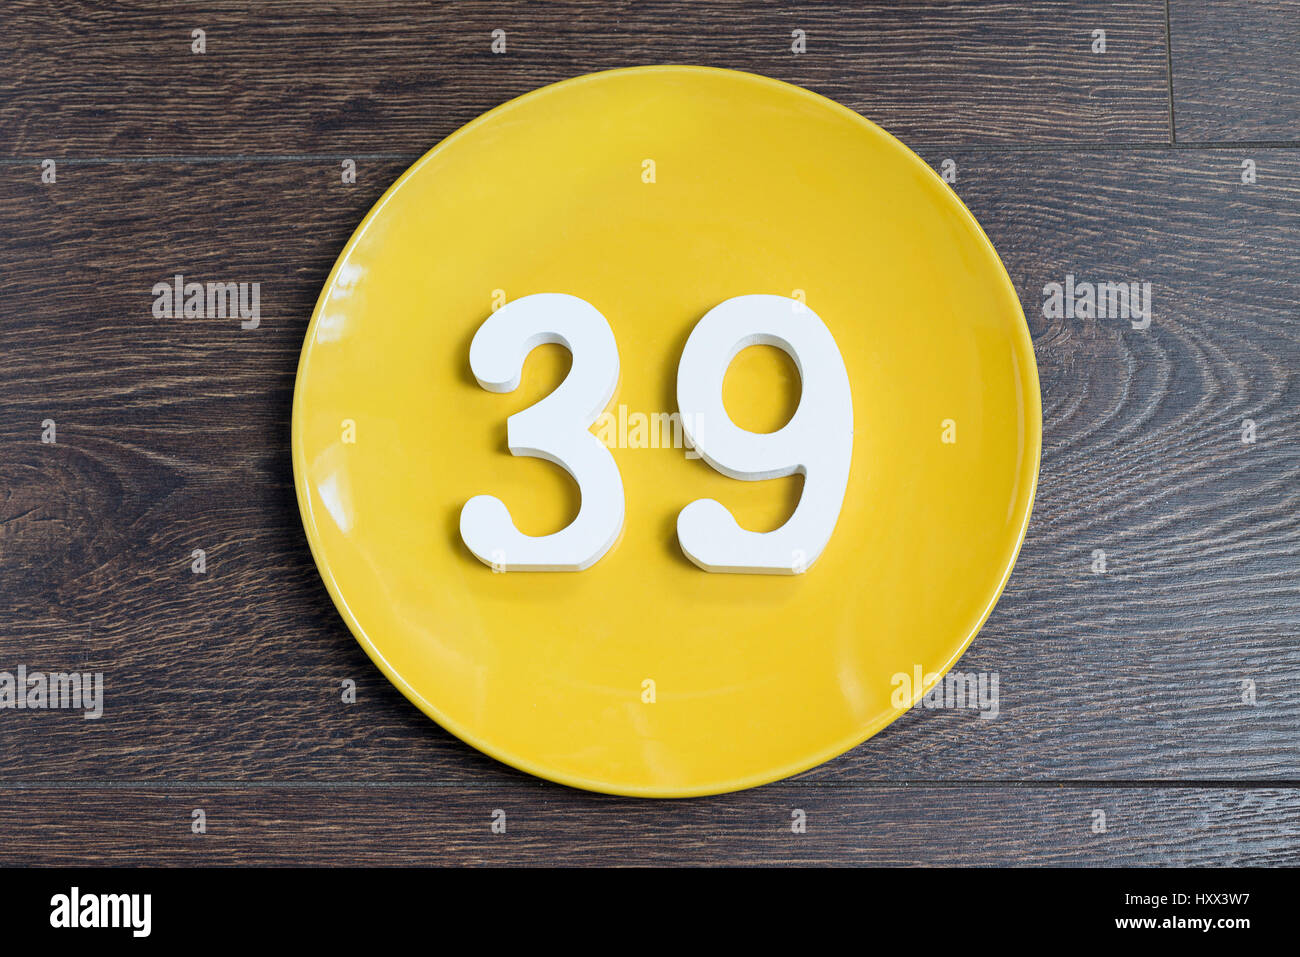 The number thirty-nine on the yellow plate and brown background. Stock Photo